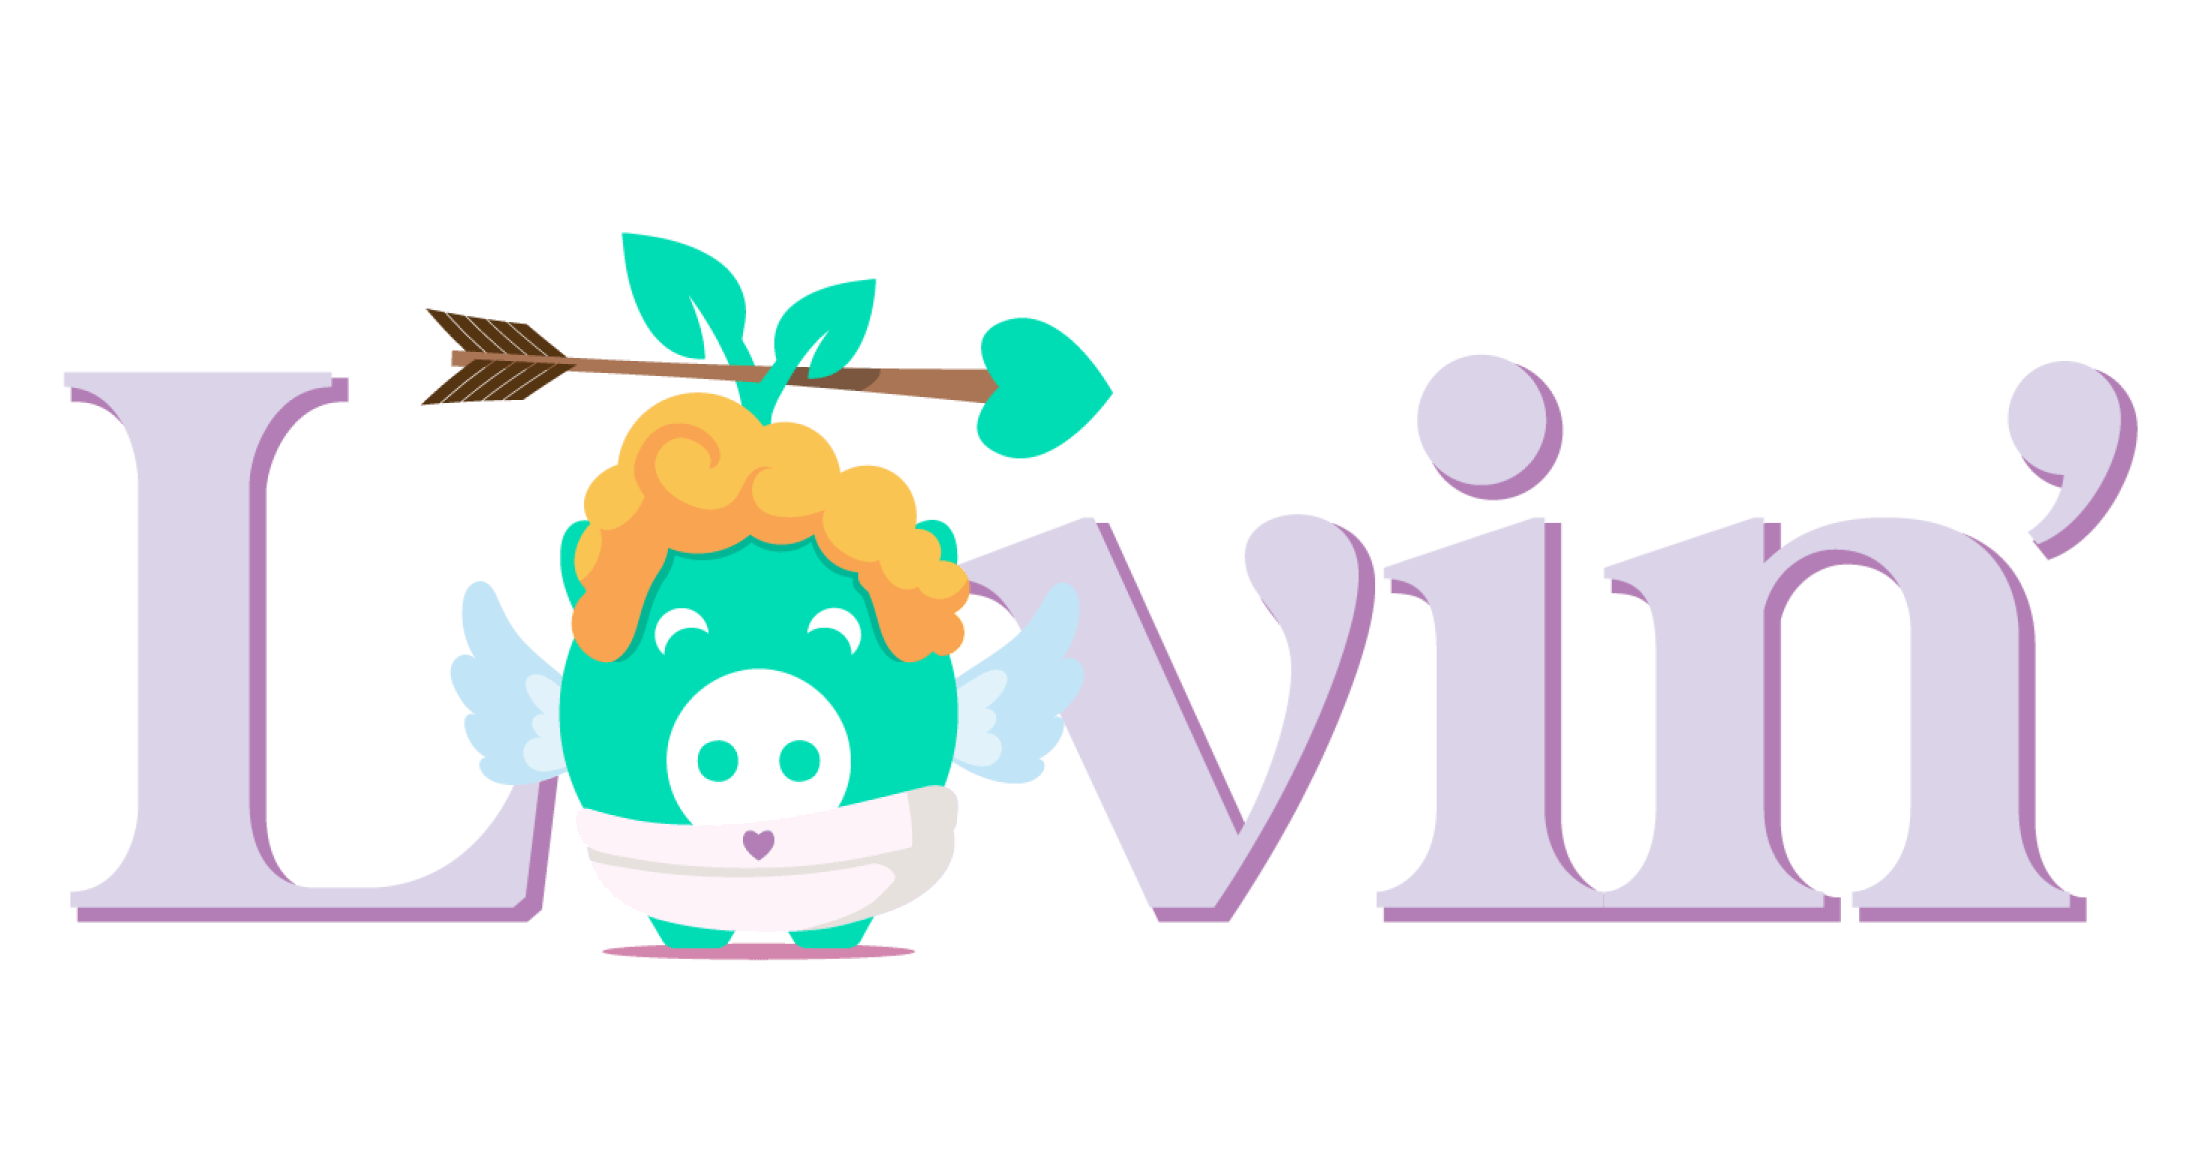 It's time for some serious Loving'. Share the love for your favorite couple Meevo + Tippy!